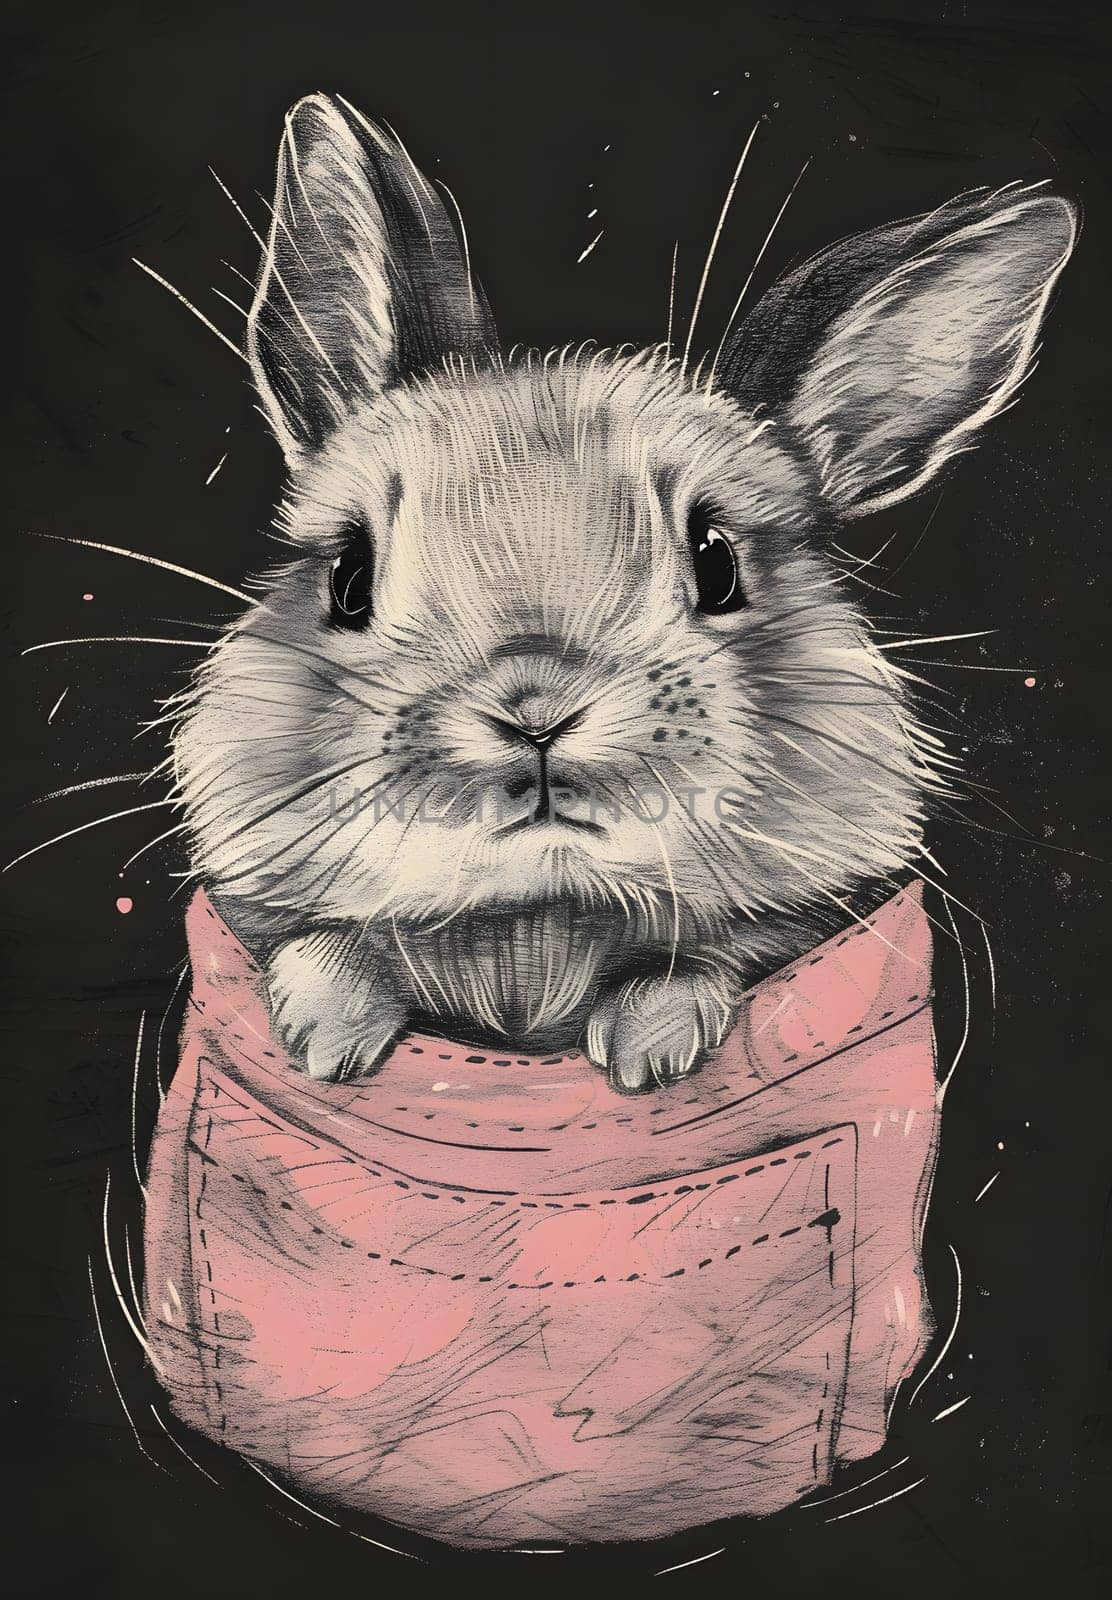 A rabbit with long ears and whiskers is comfortably sitting in a pink pocket against a black background, showcasing the beauty of this domestic rabbit organism in an artful composition